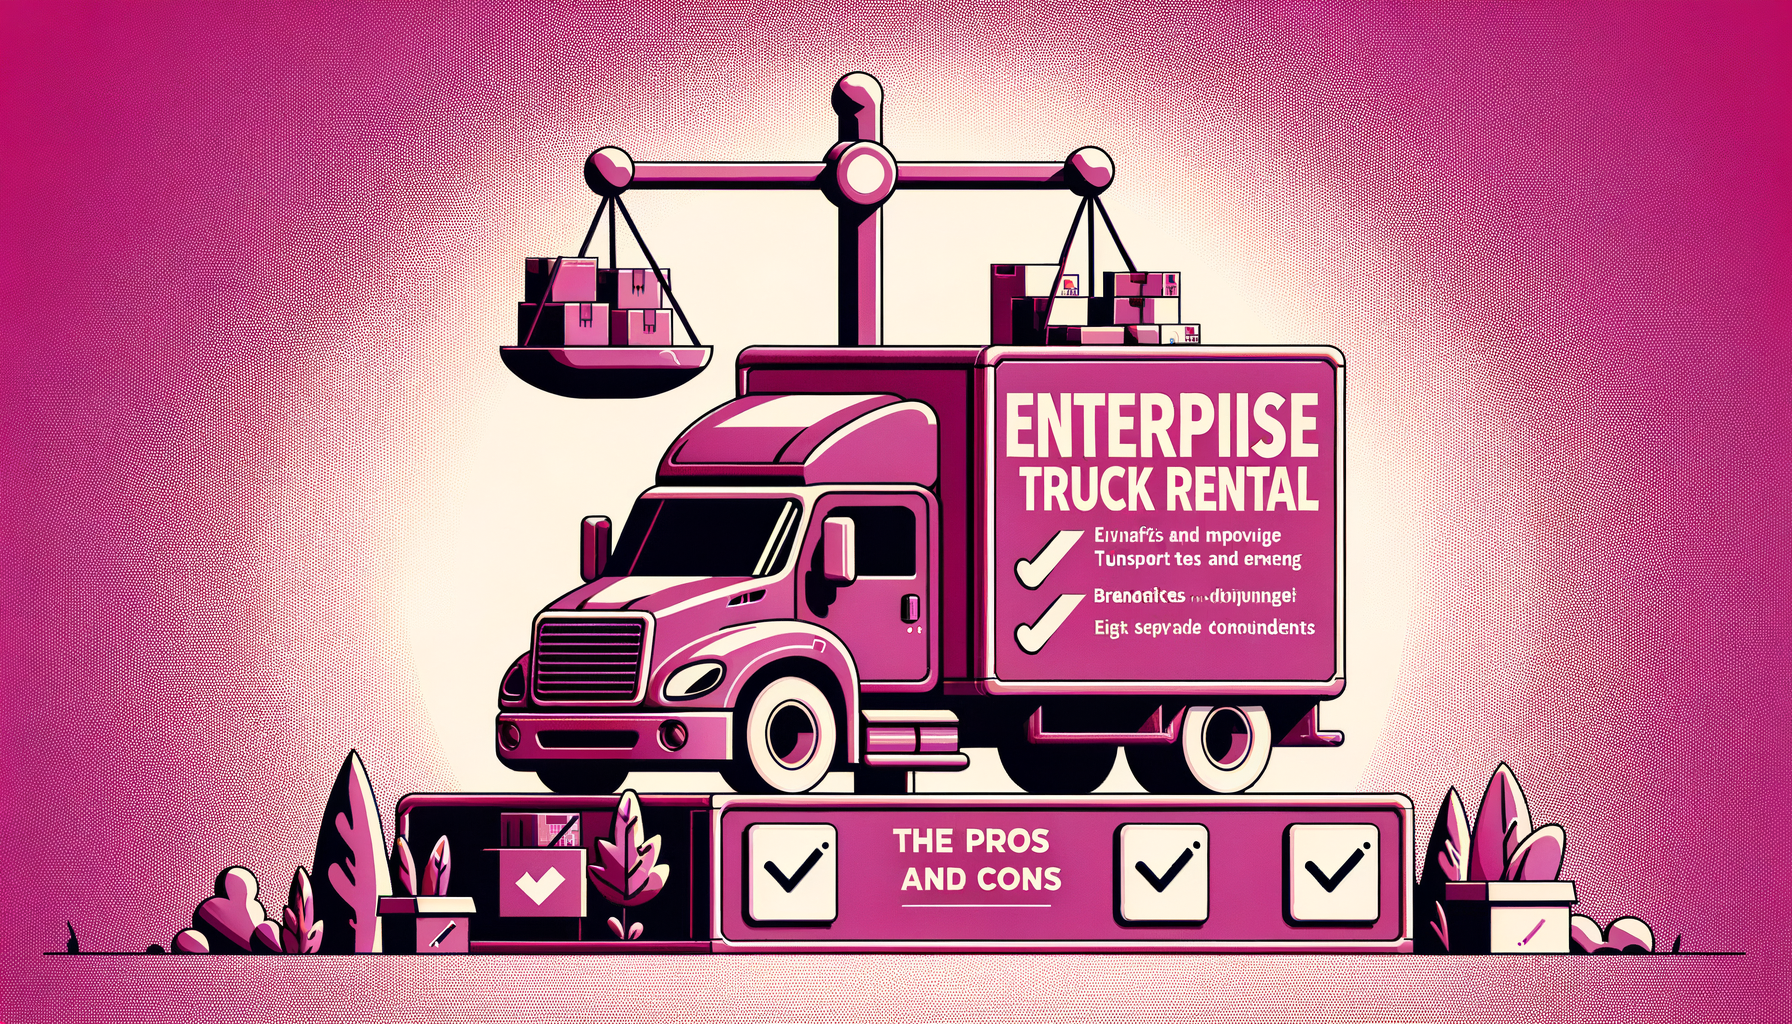 Cartoon illustration featuring a fuschia colored truck marked with "Enterprise" logo amidst thumbs-up and thumbs-down symbols indicating the pros and cons of Enterprise Truck Rental.